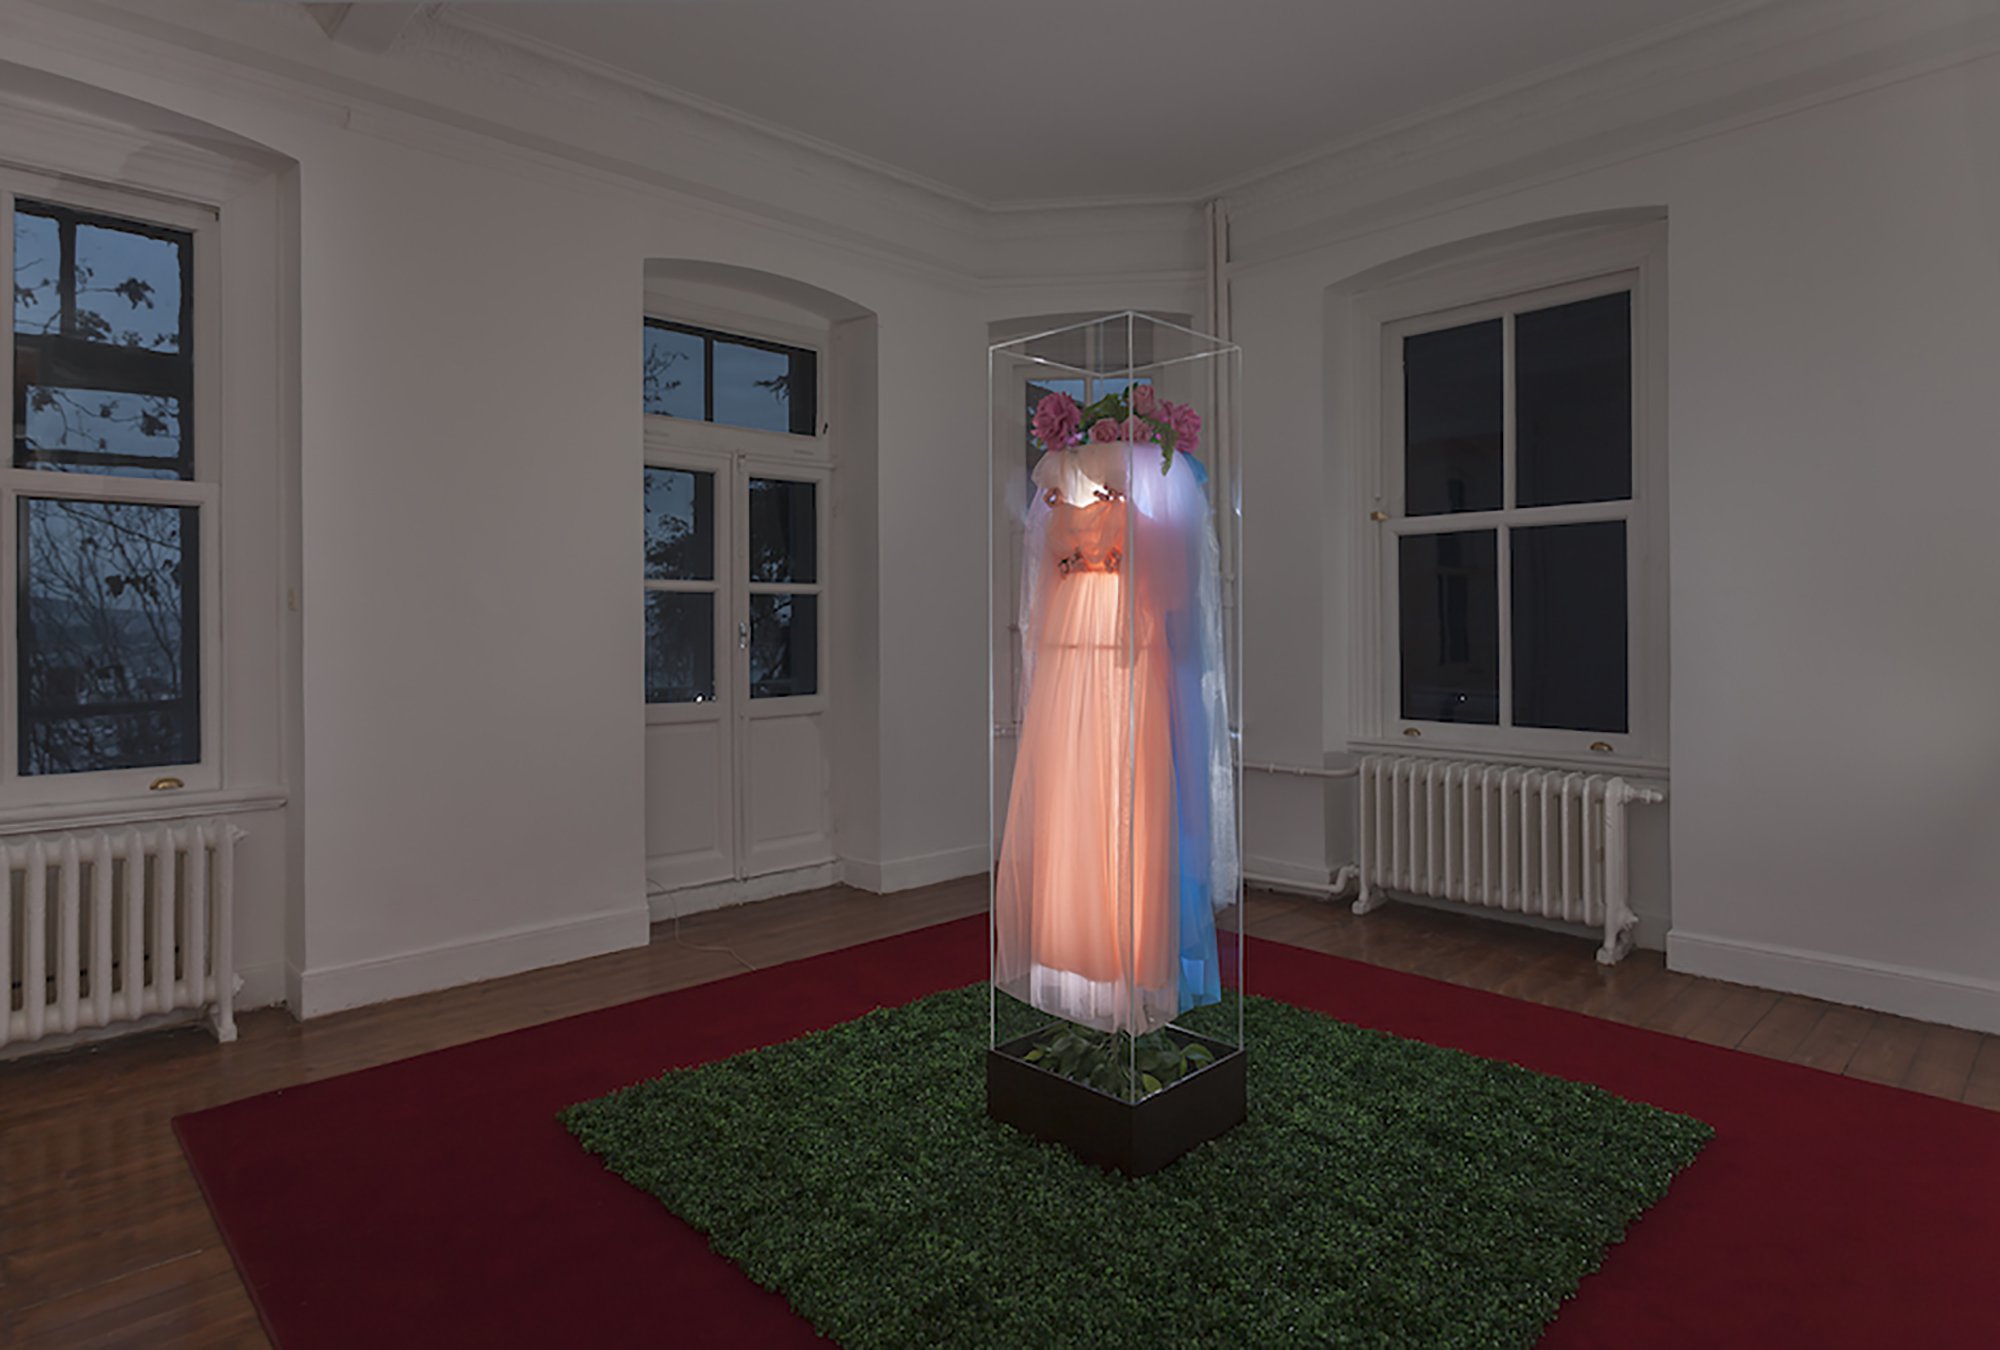 Gülsün Karamustafa, The Monument of Kitsch 2, found tulle dresses, plastic flowers and plants, iron structure, fluorescent lights, wooden base, plexiglass, dimensions variable, 1988 – 2013. Installation view, Talisman, Rodeo, Istanbul, 2013